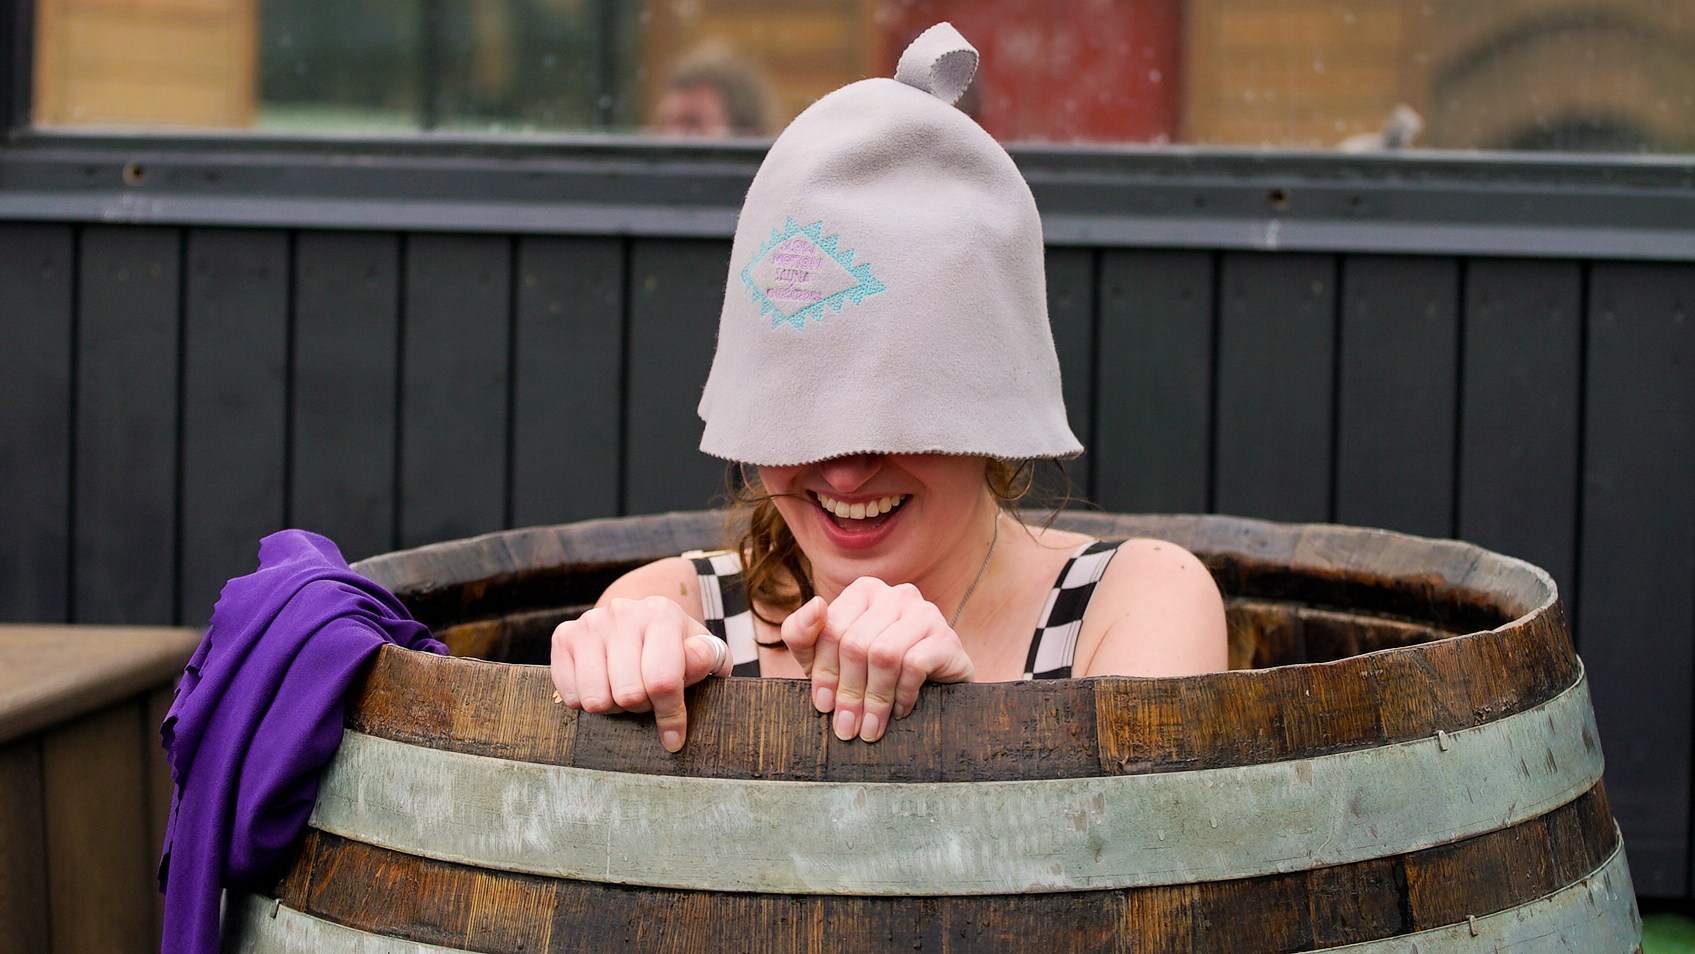 The Saunaverse, the UK’s first sauna festival, features all manner of saunas